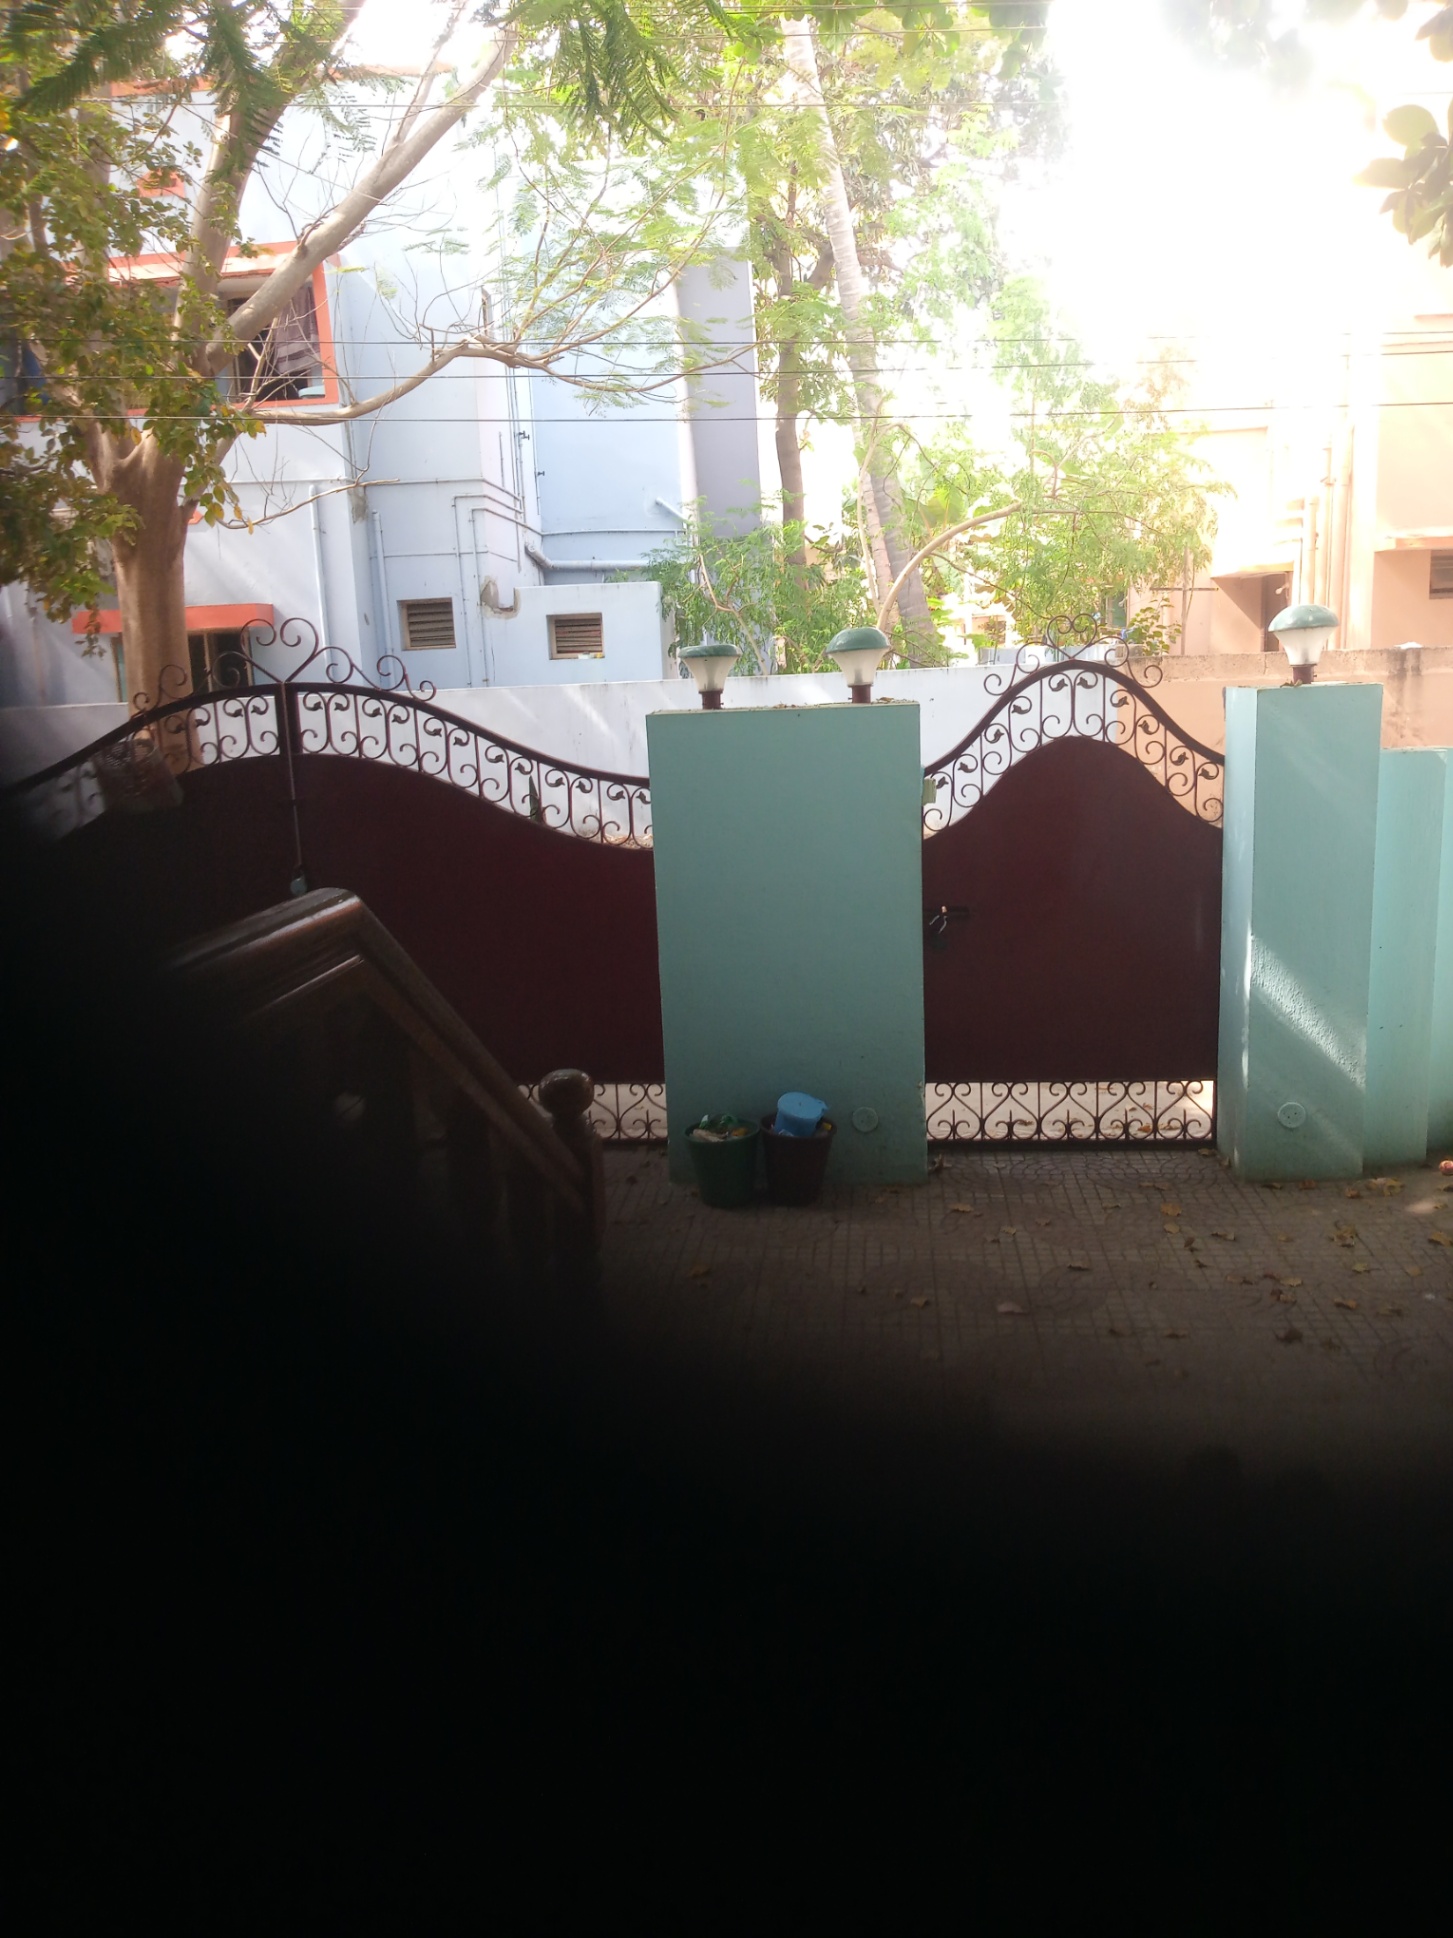 2 Bed/ 2 Bath Rent House/ Bungalow/ Villa; 1,200 sq. ft. carpet area, Semi Furnished for rent @Palayamkottai 